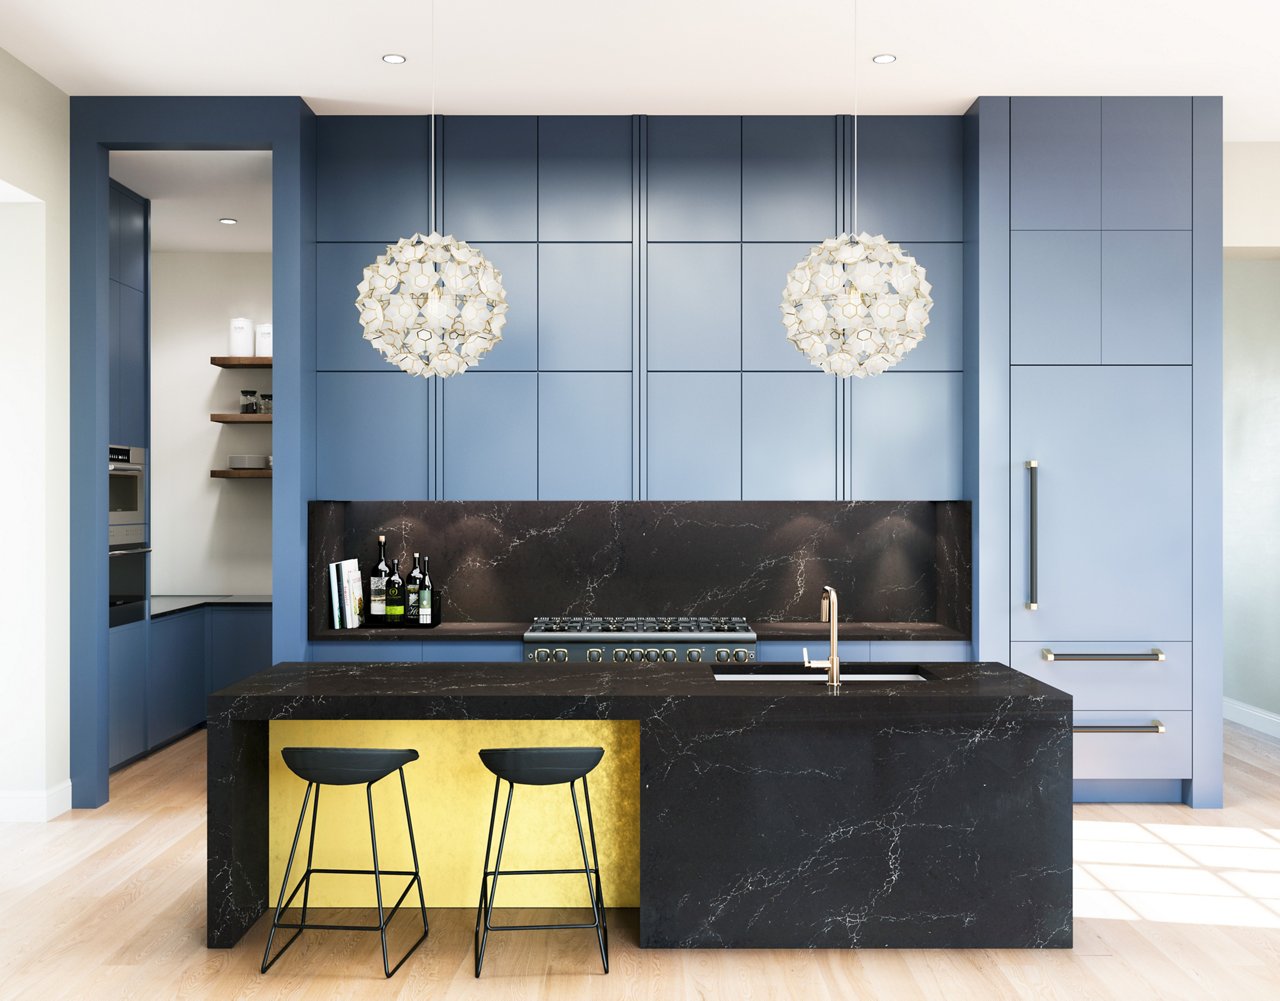 Modern kitchen with blue cabinets and hanging light fixtures with Charlestown quartz countertops and backsplash